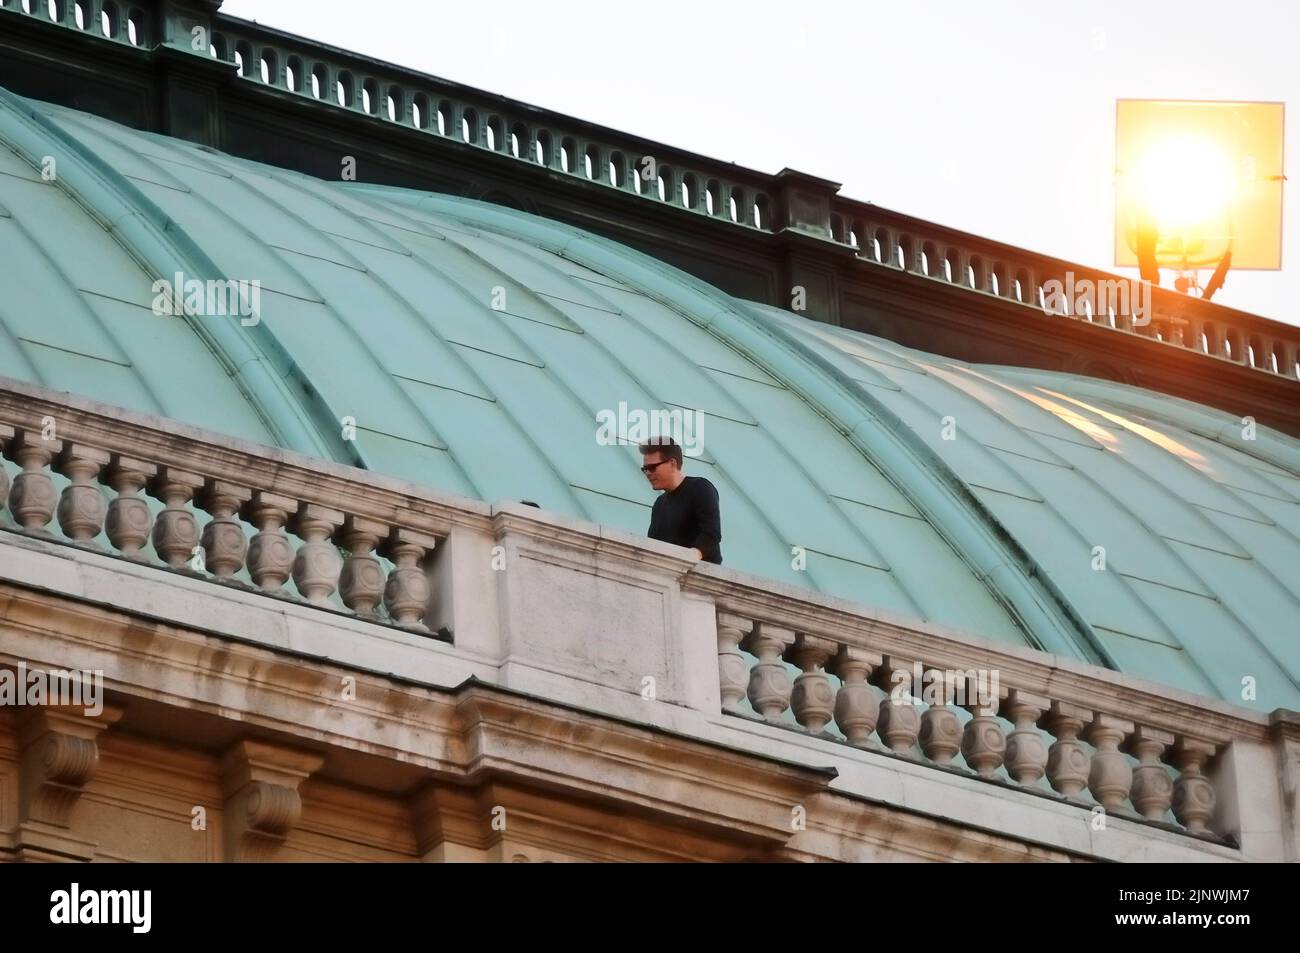 Vienna, Austria. August 28, 2014. Filming for Mission: Impossible 5 at the Vienna State Opera with Christopher McQuarrie Stock Photo